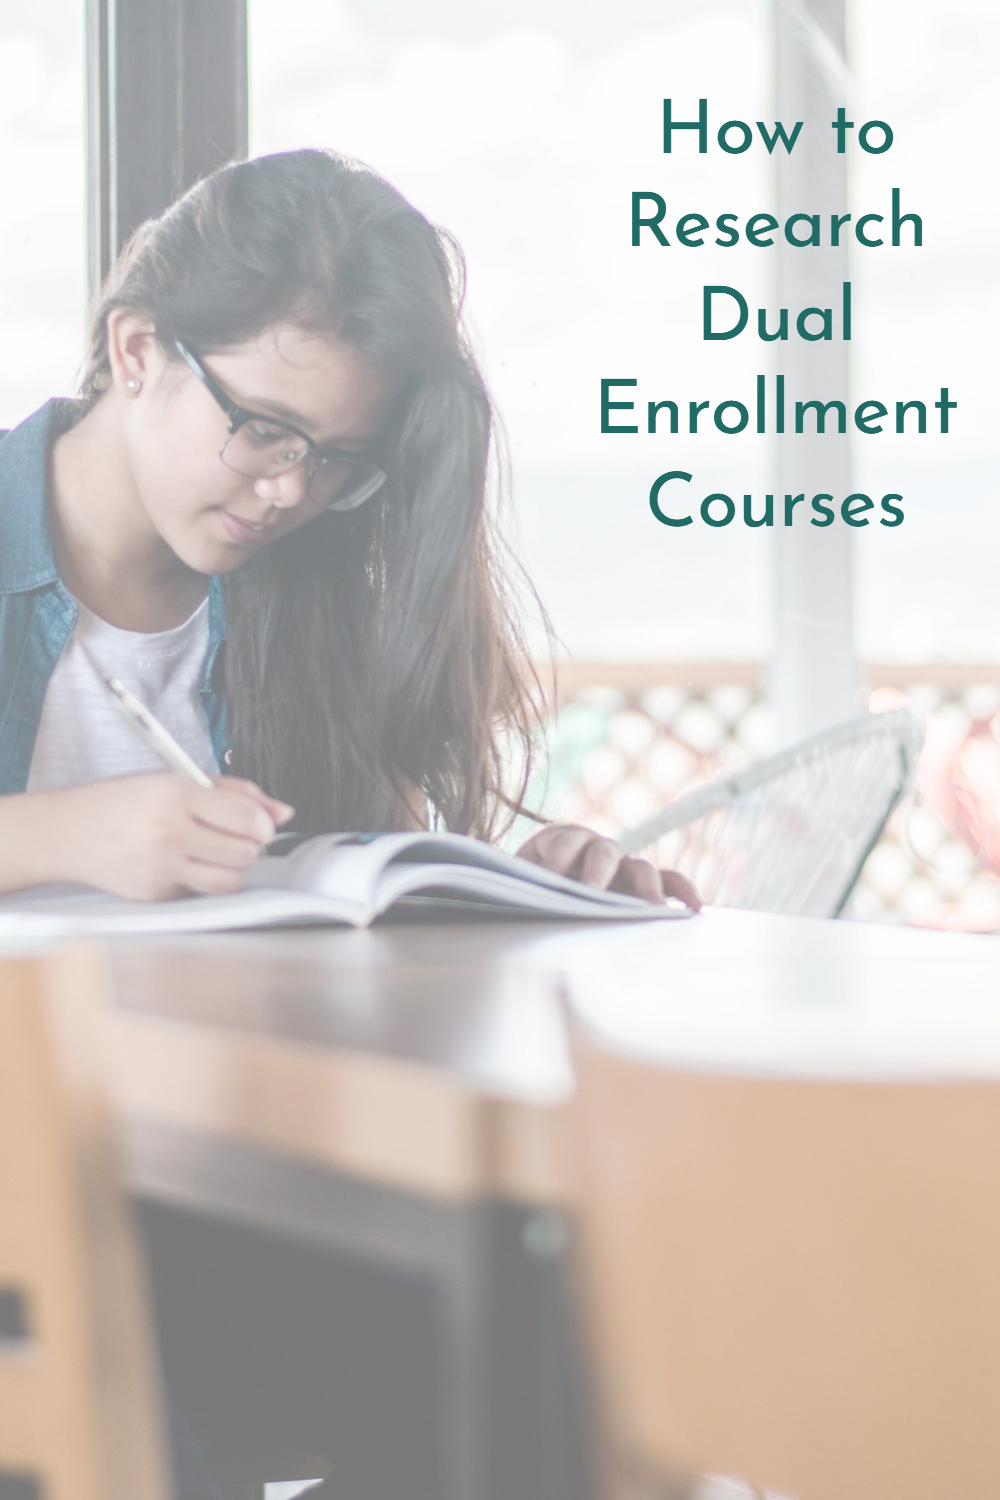 How to Research Dual Enrollment Classes